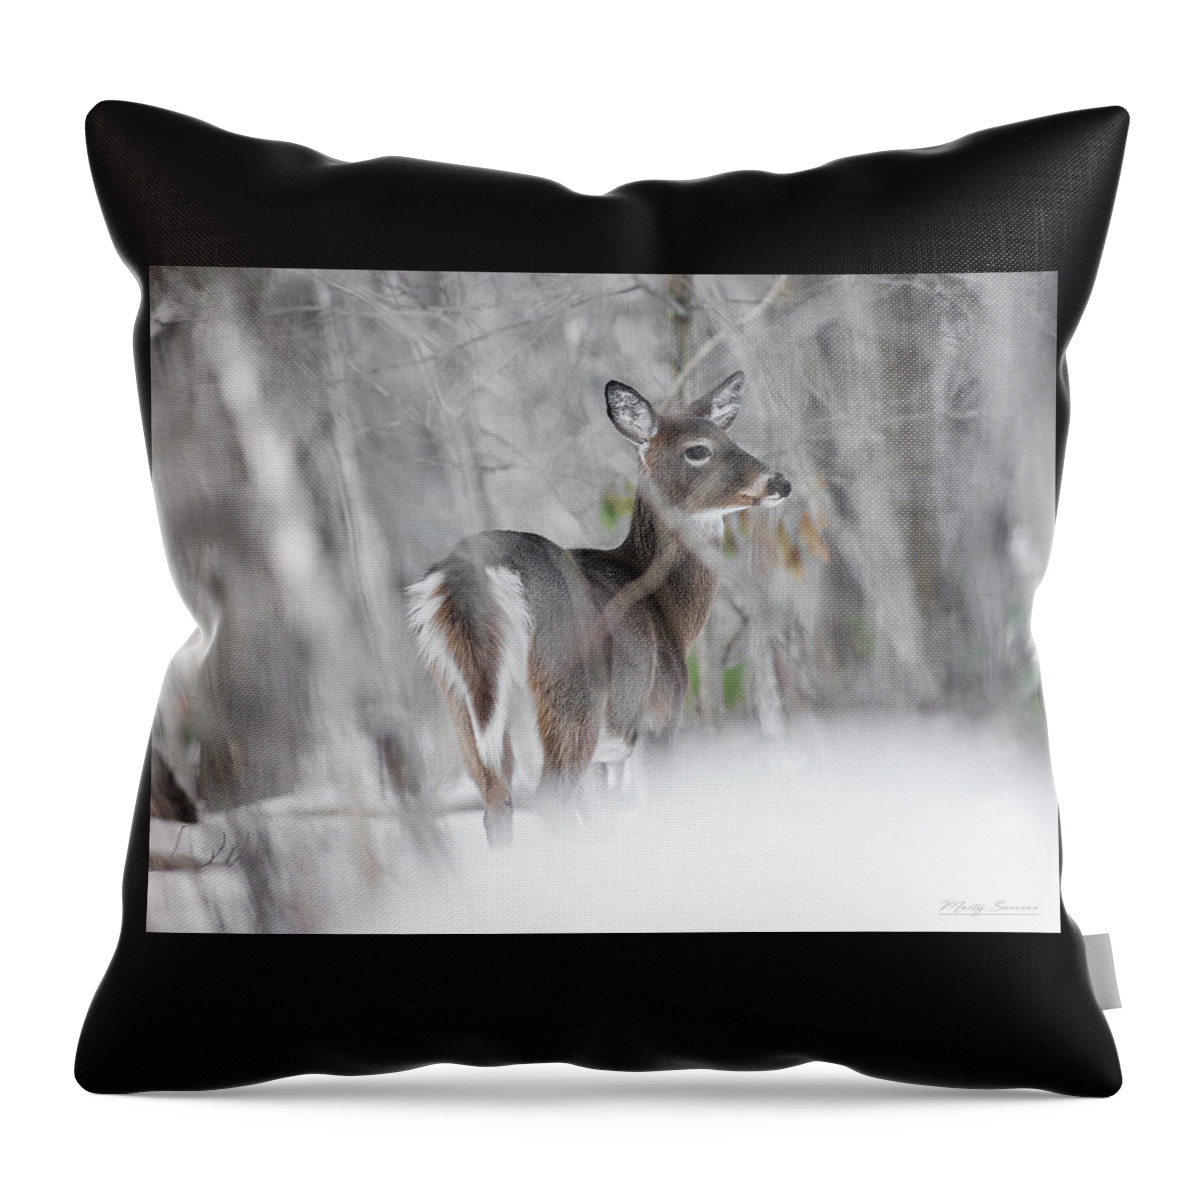 Pensive Doe Throw Pillow featuring the photograph Pensive Doe by Marty Saccone